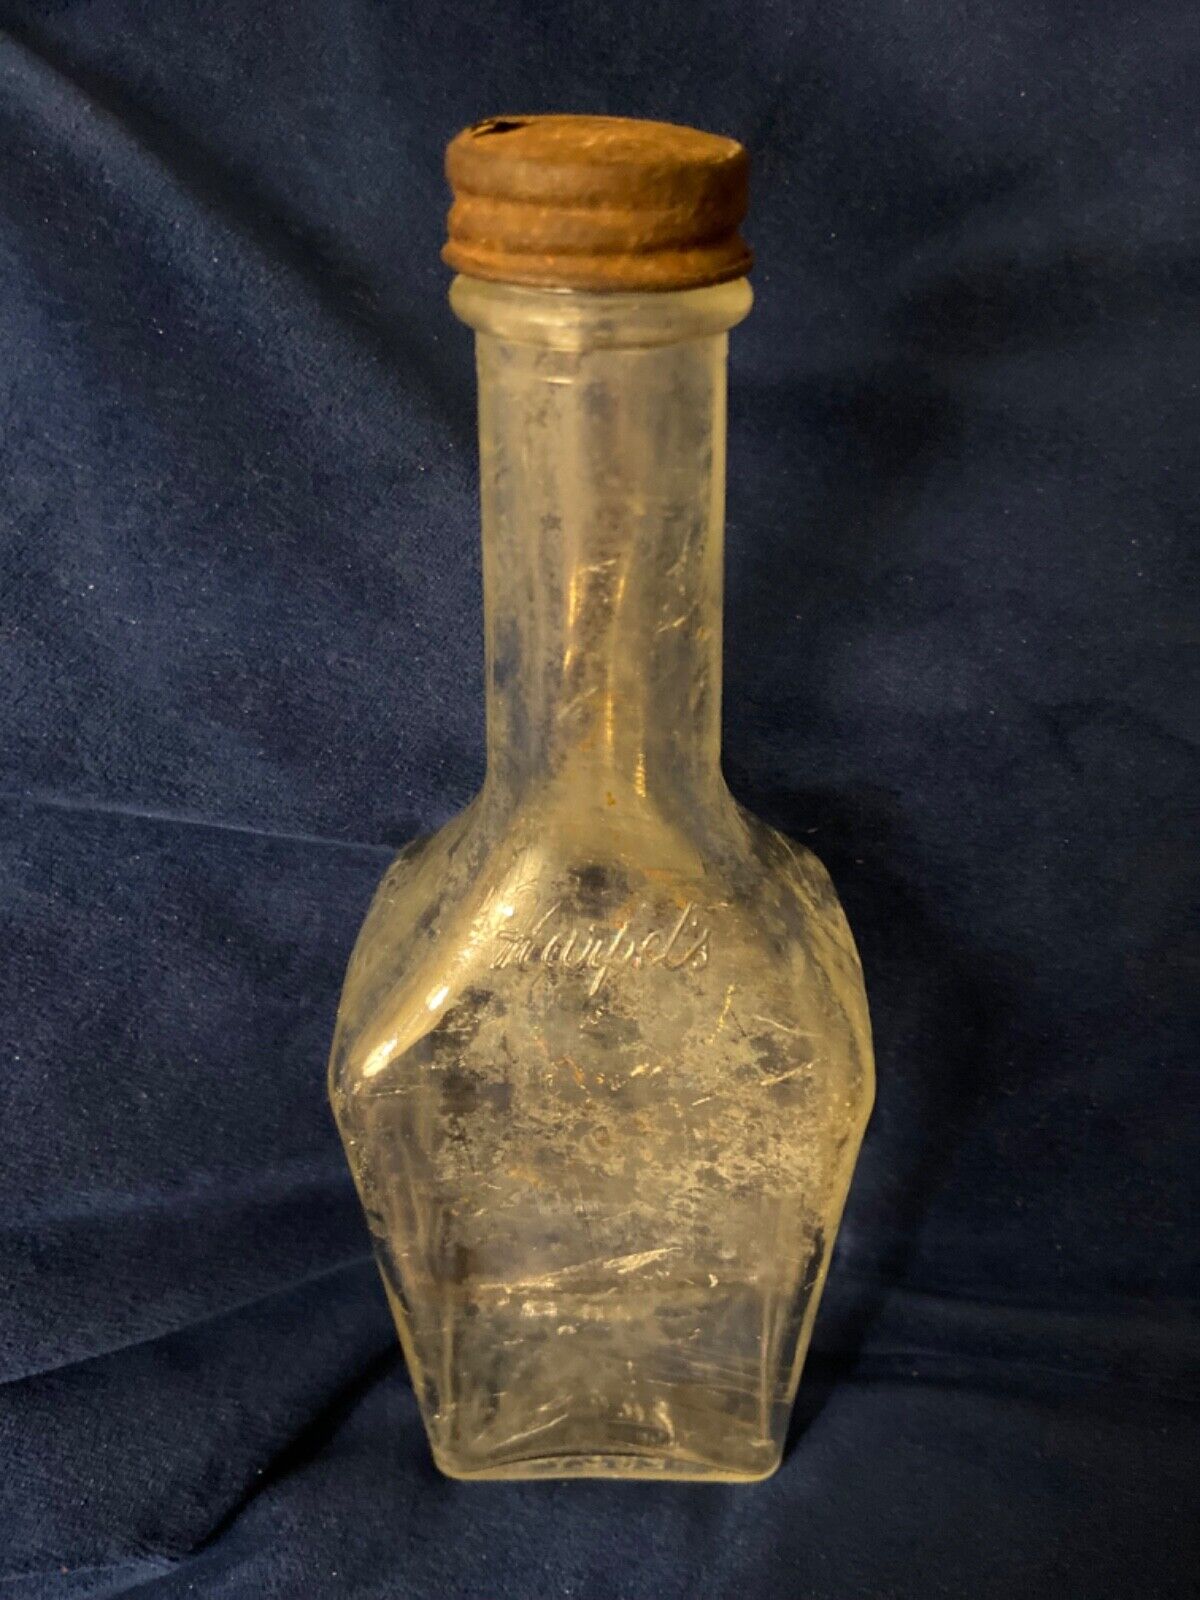 vintage “Harpel’s” bottle. What an interesting piece seeing how there is no af I